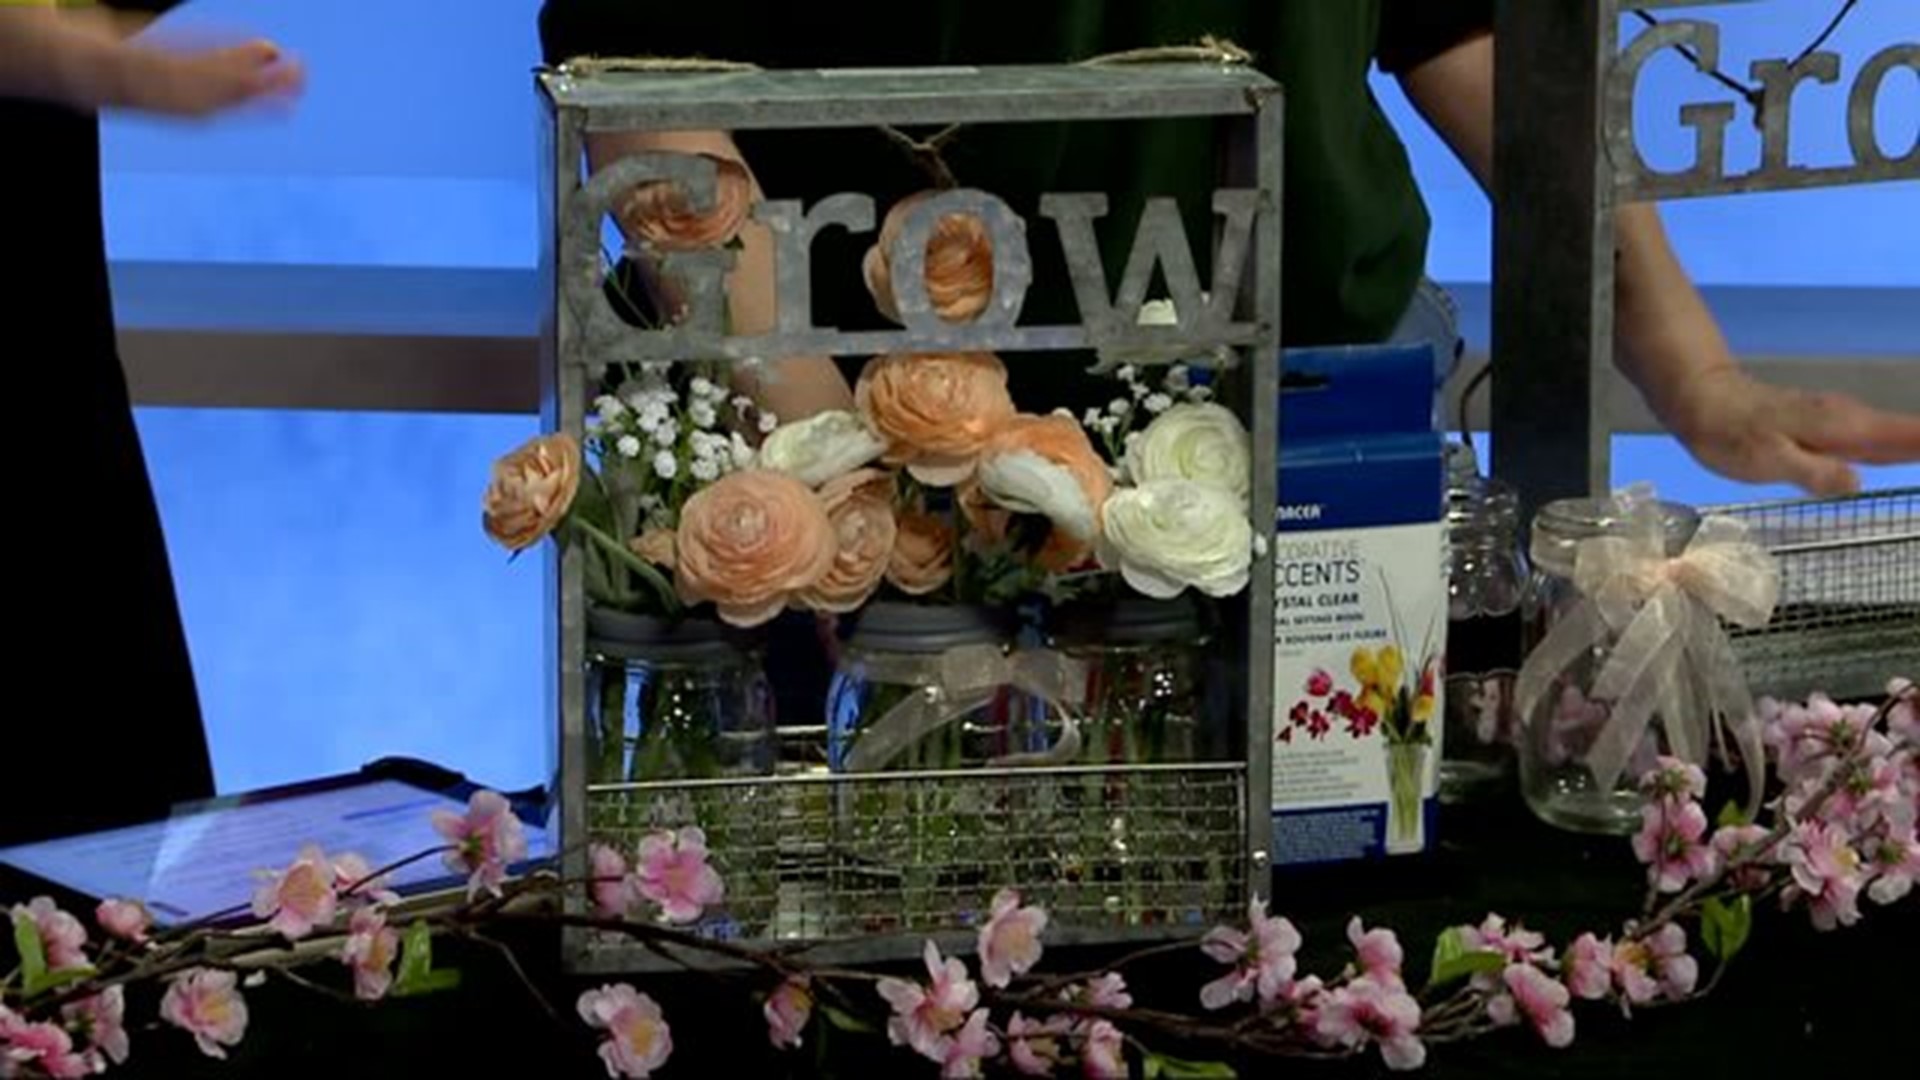 Jo-Ann Fabric and Craft Stores stops by to celebrate National Craft Month